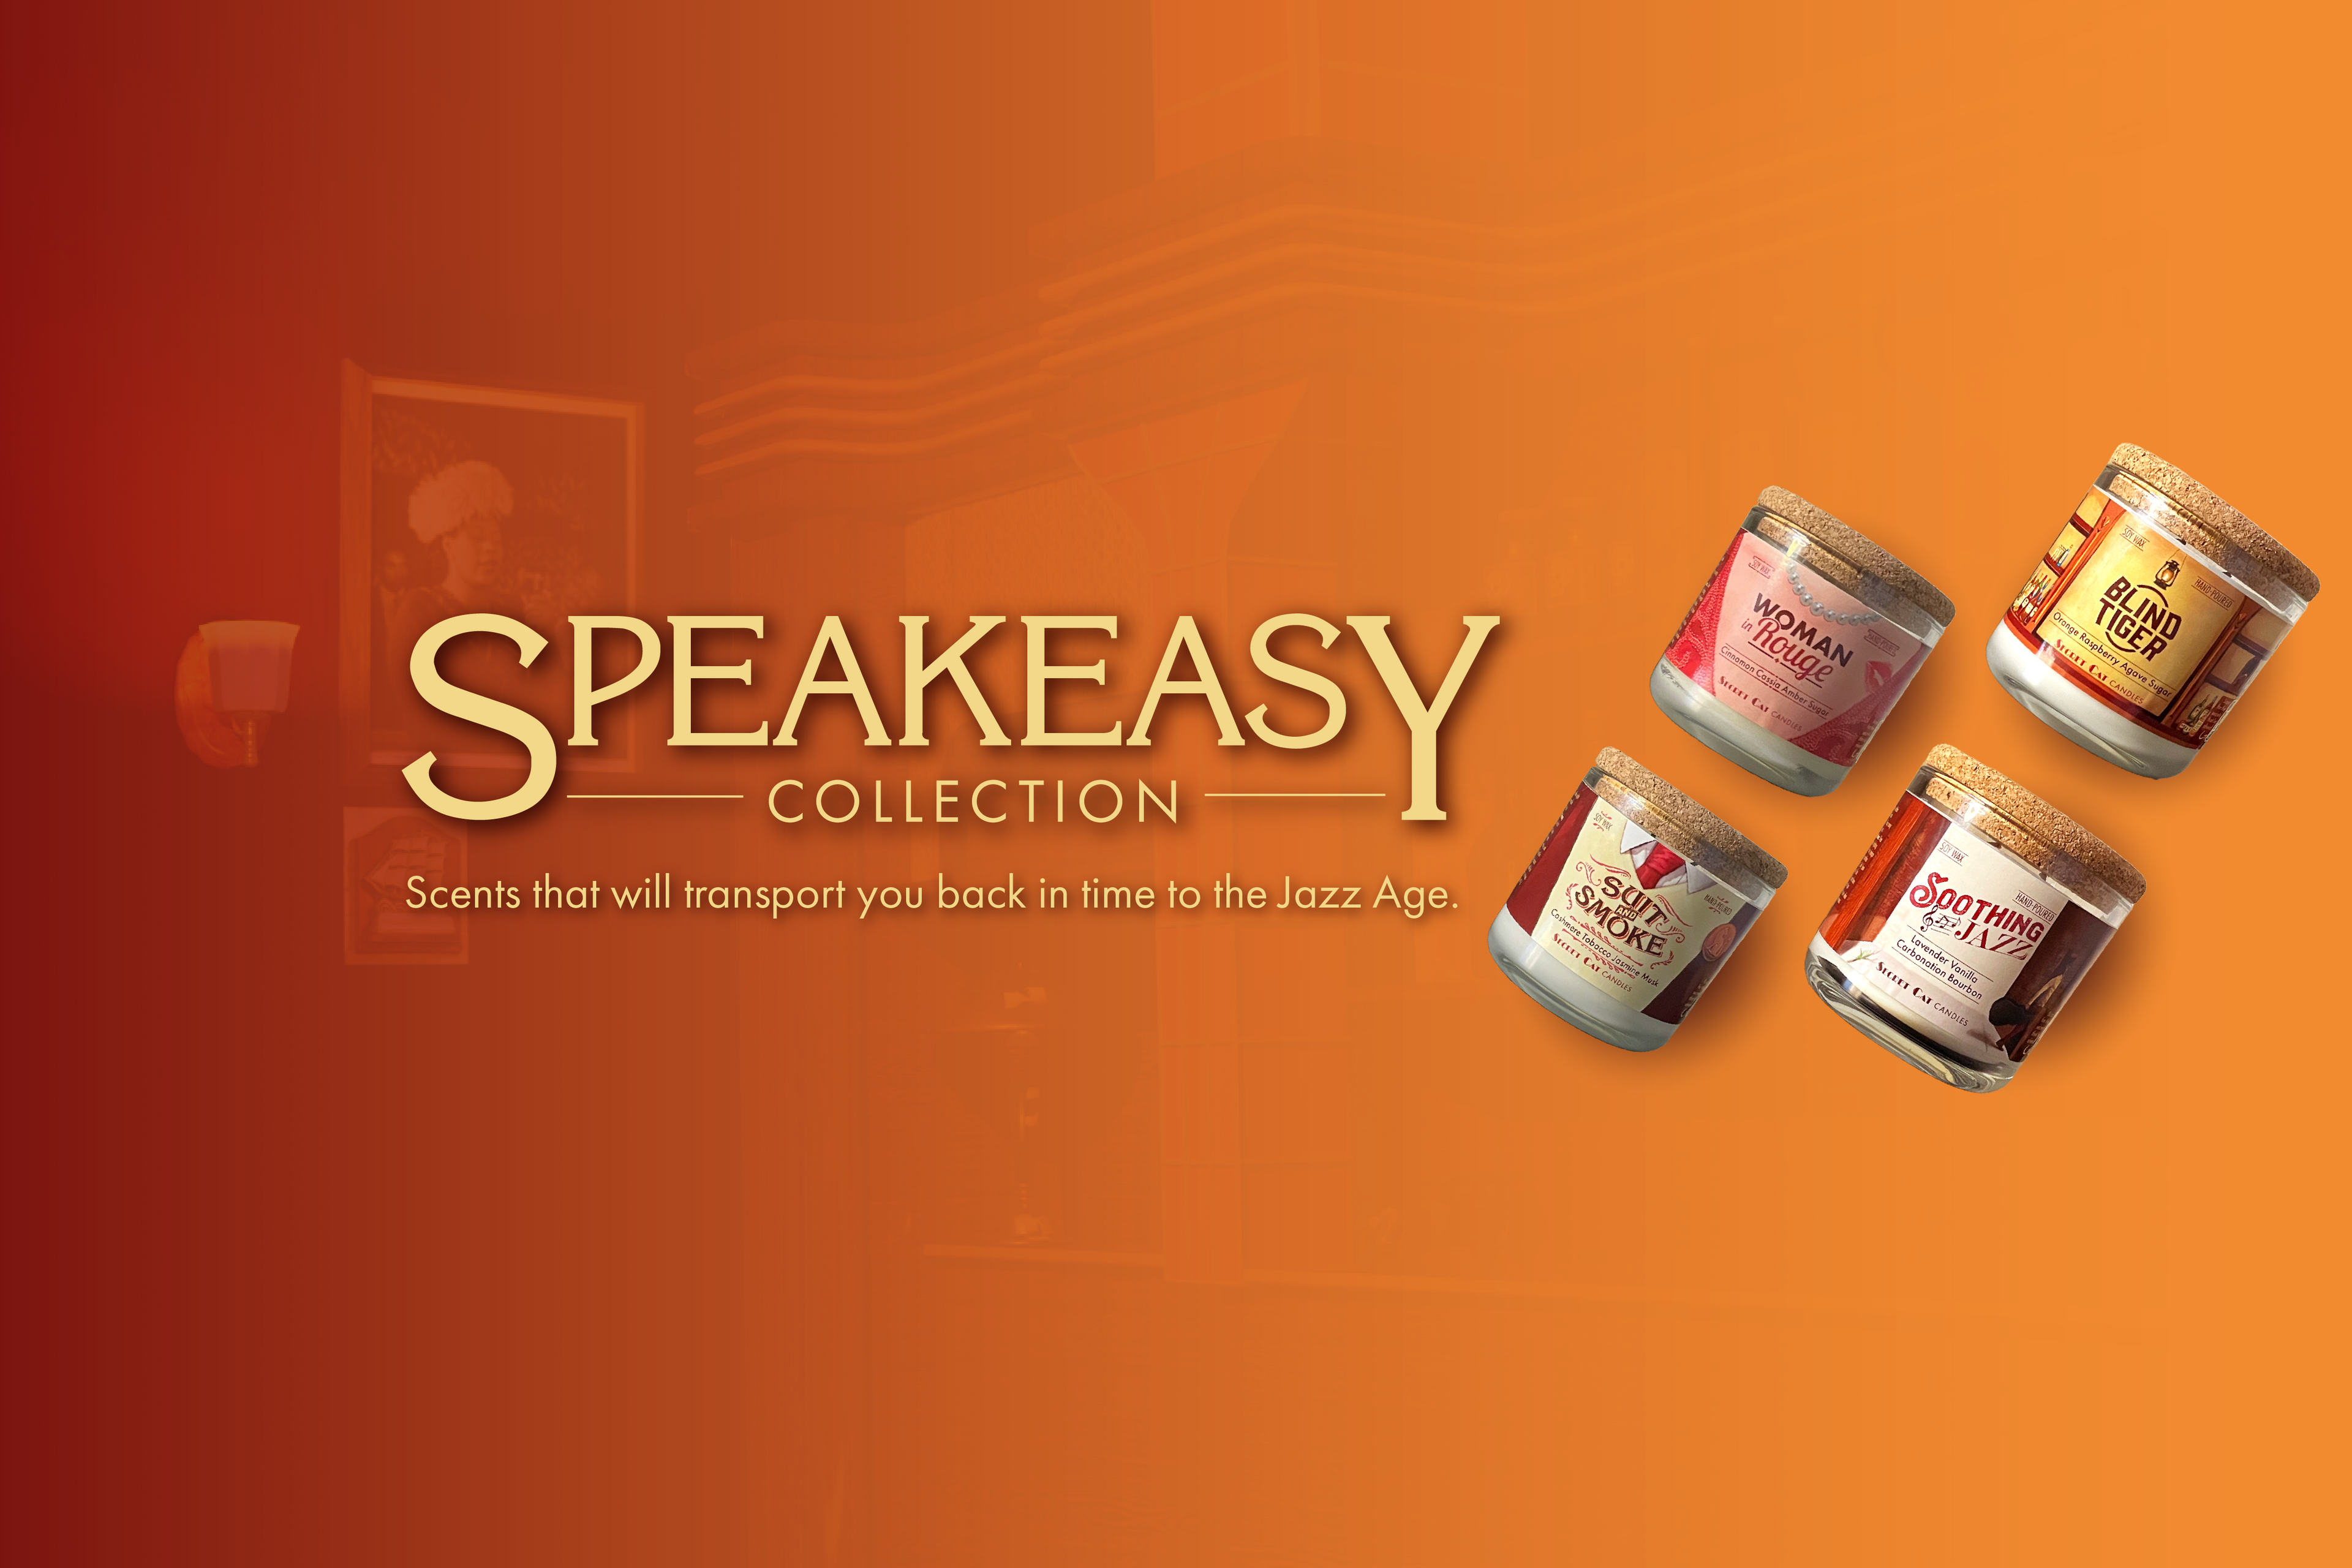 photo with words speakeasy collection and scents that will transport you back in time to the Jazz Age. Candles are next to it at an angle with a shadow behind. The background is orange and red gradient with a speakeasy overlay.